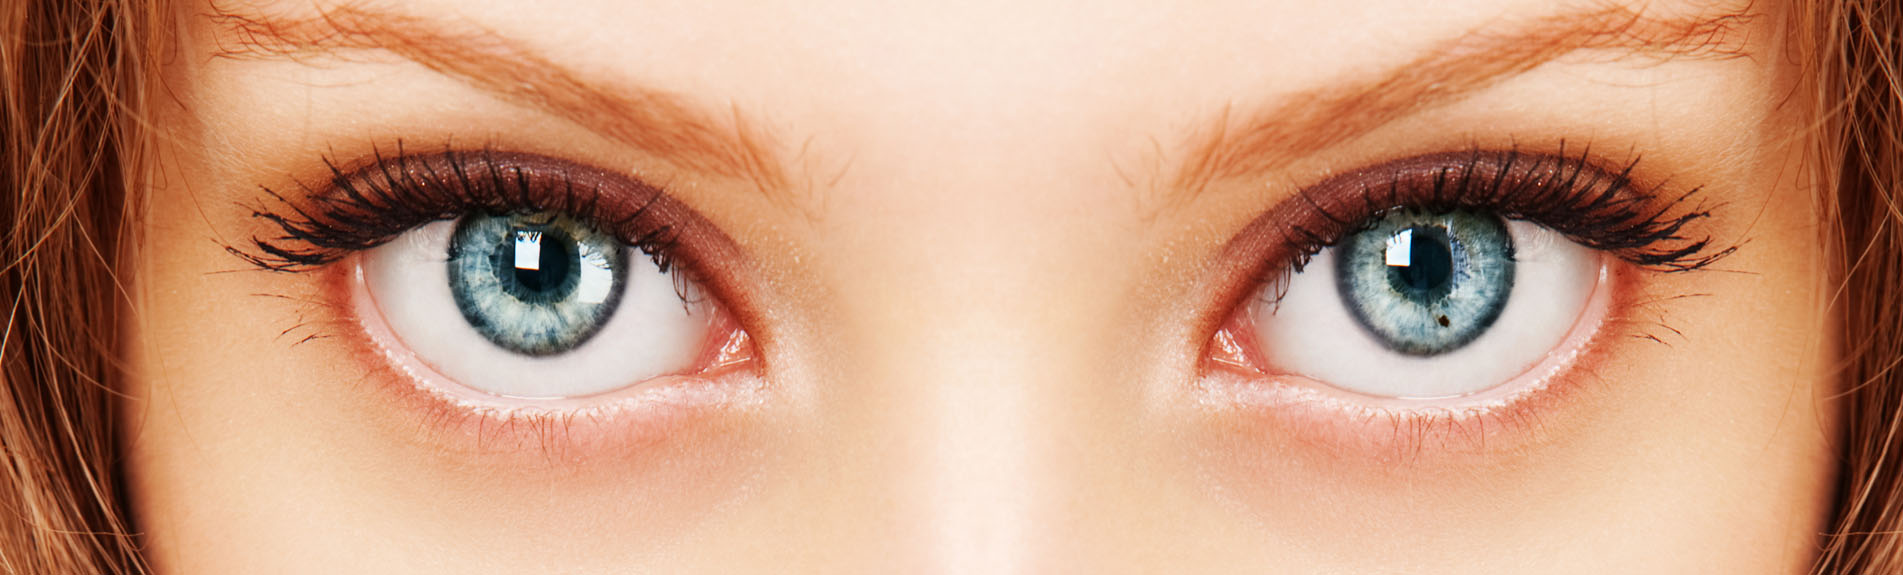 Amazing facts about human eyes